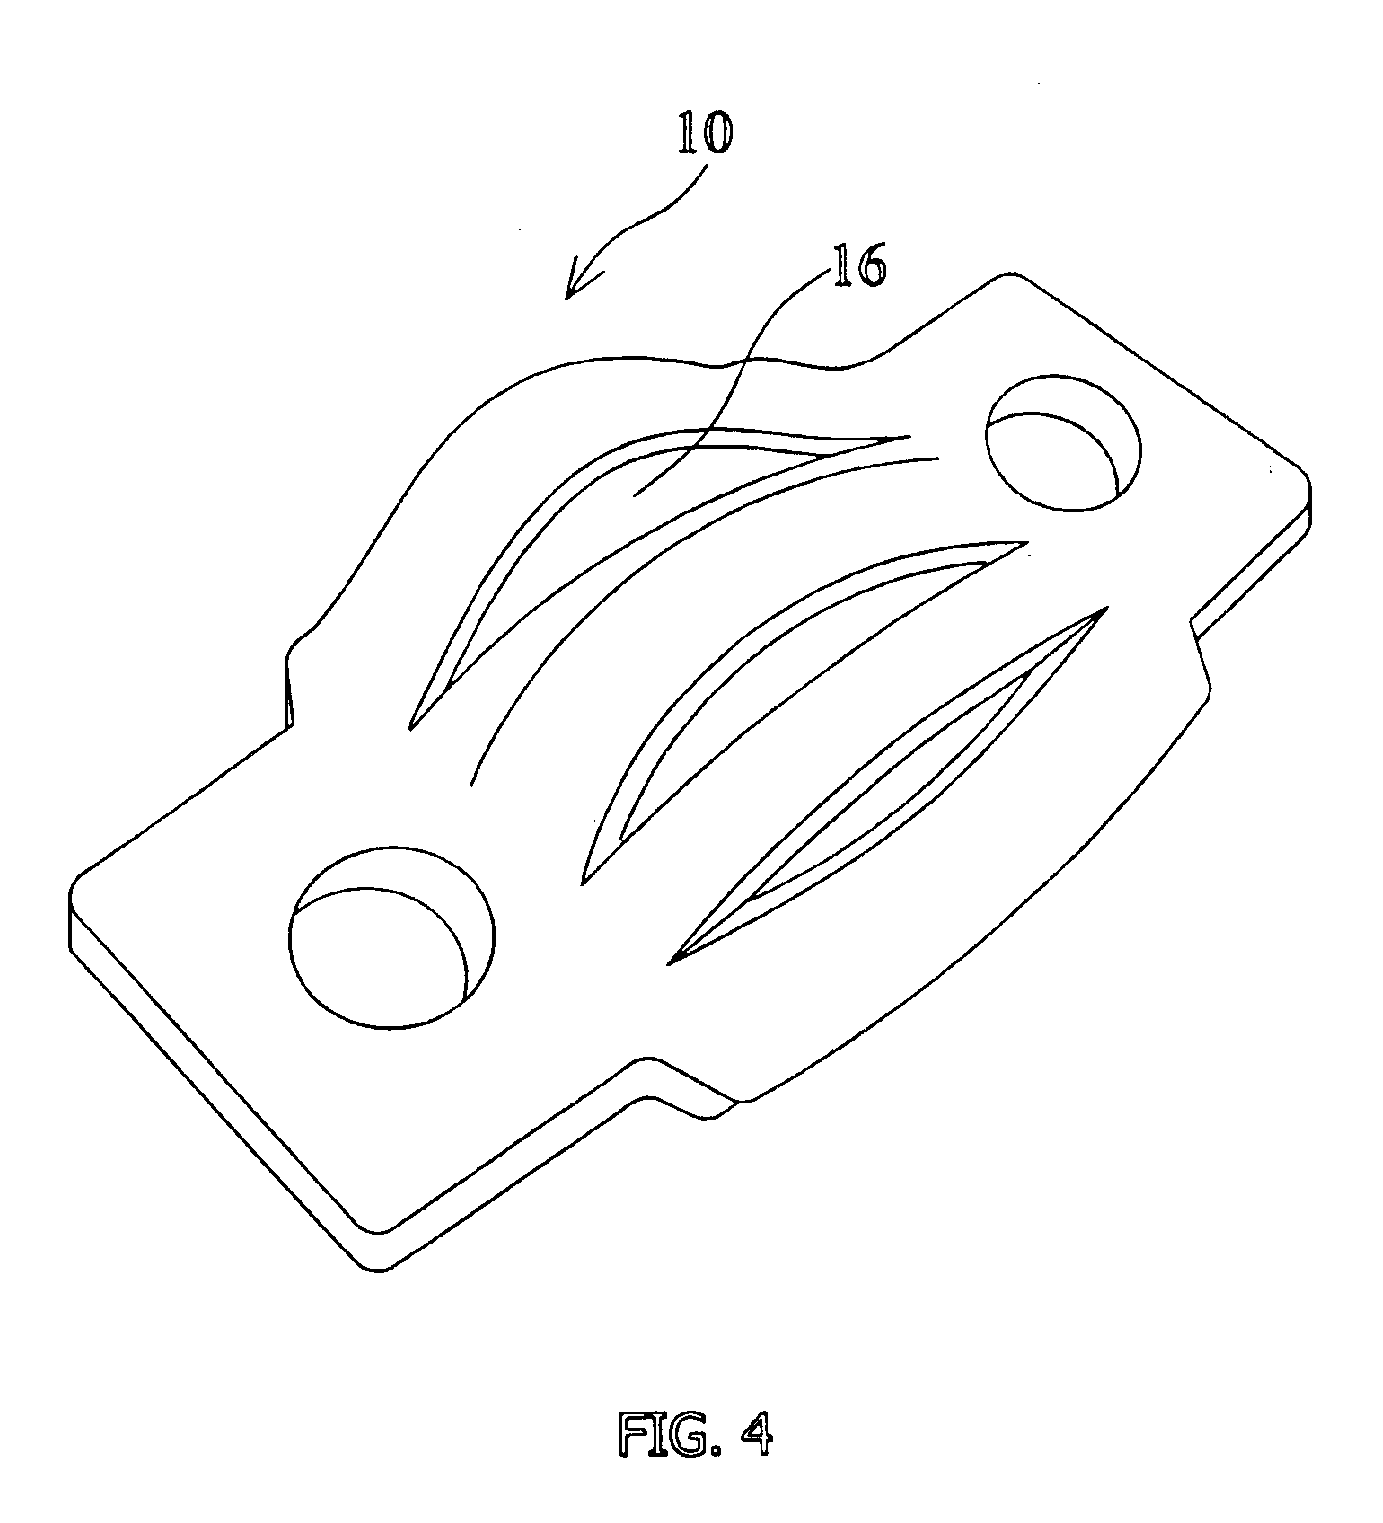 Combined electrical connector and radiator for high current applications